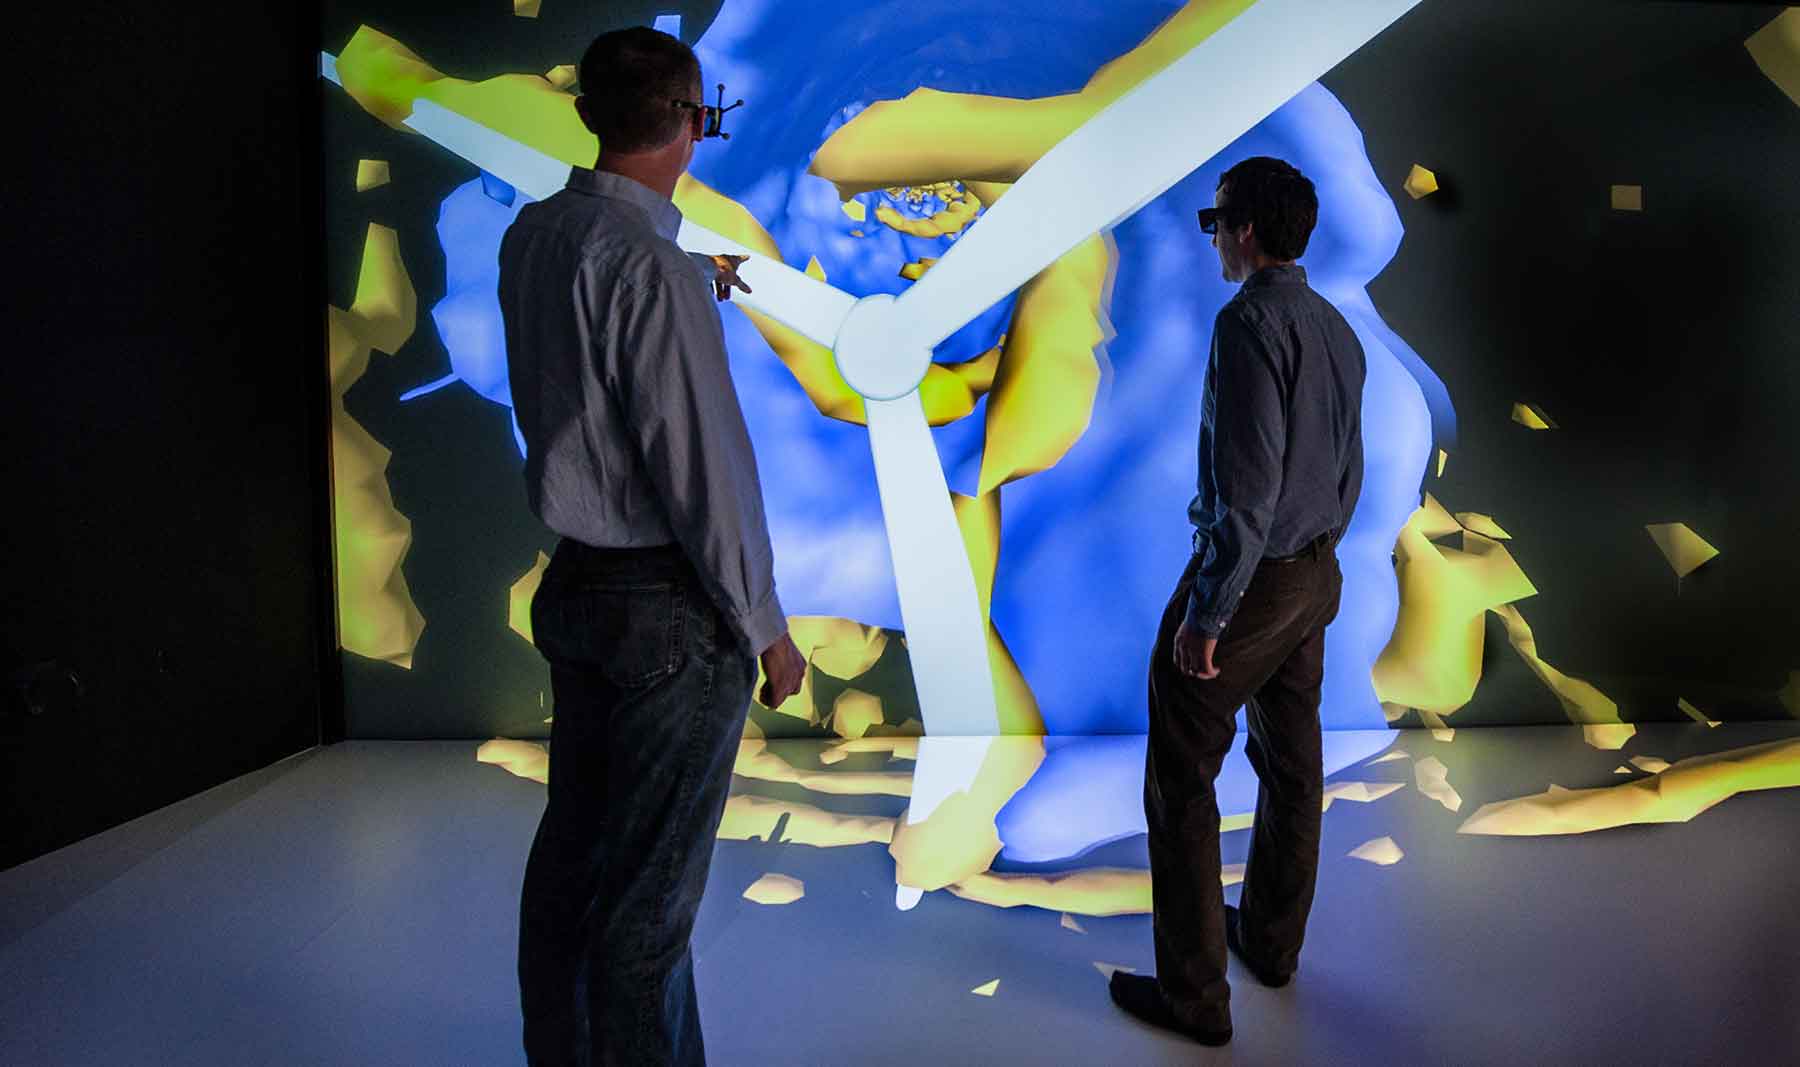 An engineer wearing special glasses points to an image on a large visualization as another engineer looks on.